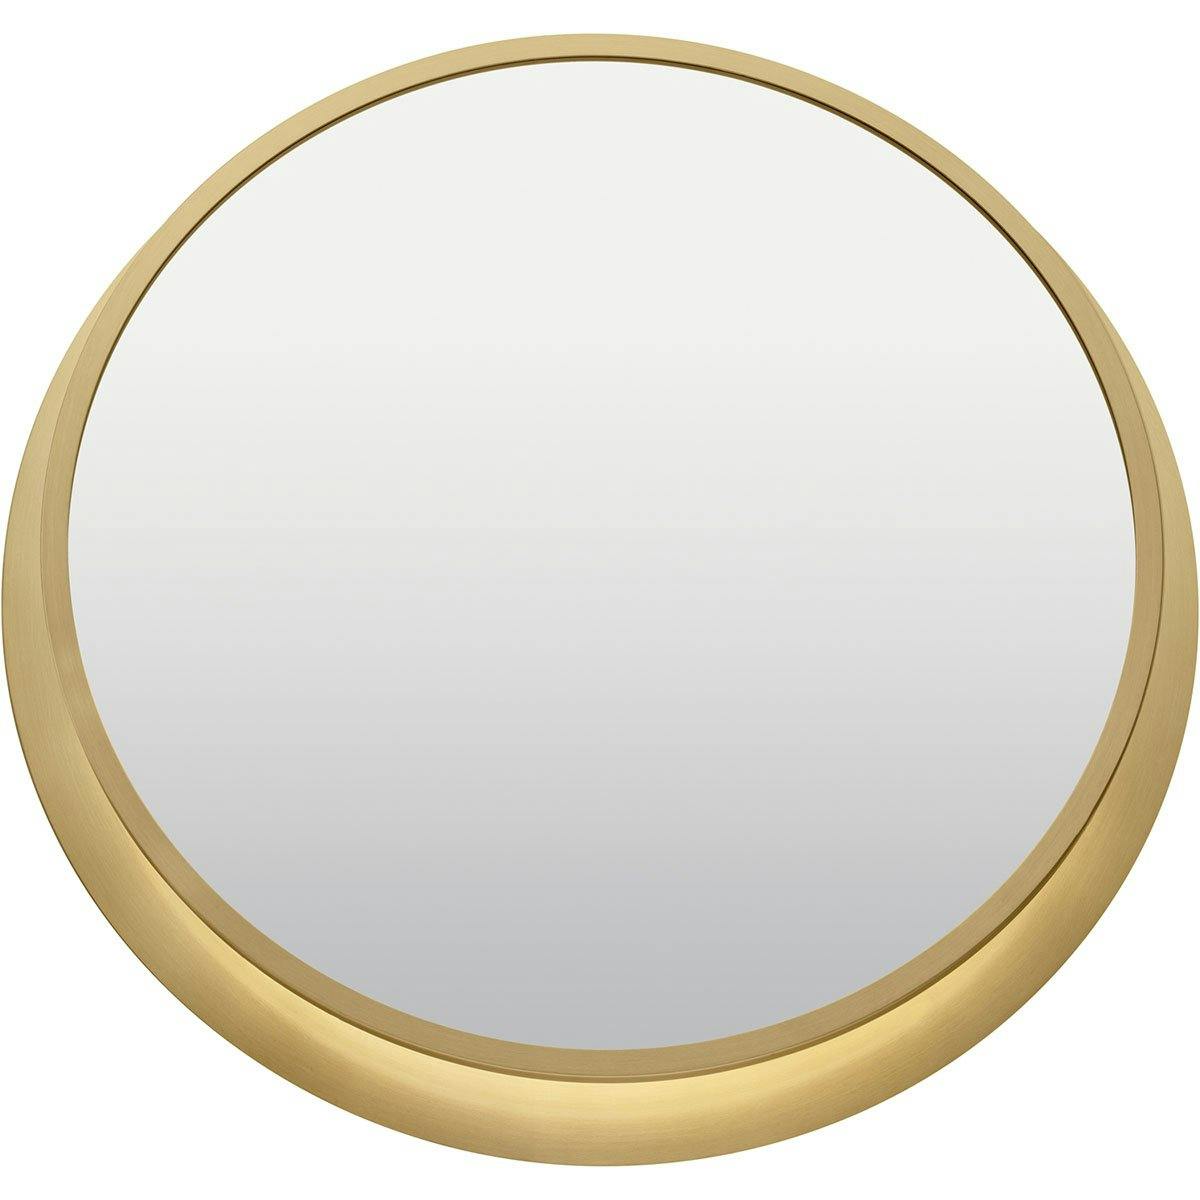 Front view of the Chennai 30" LED Vanity Mirror Gold on a white background